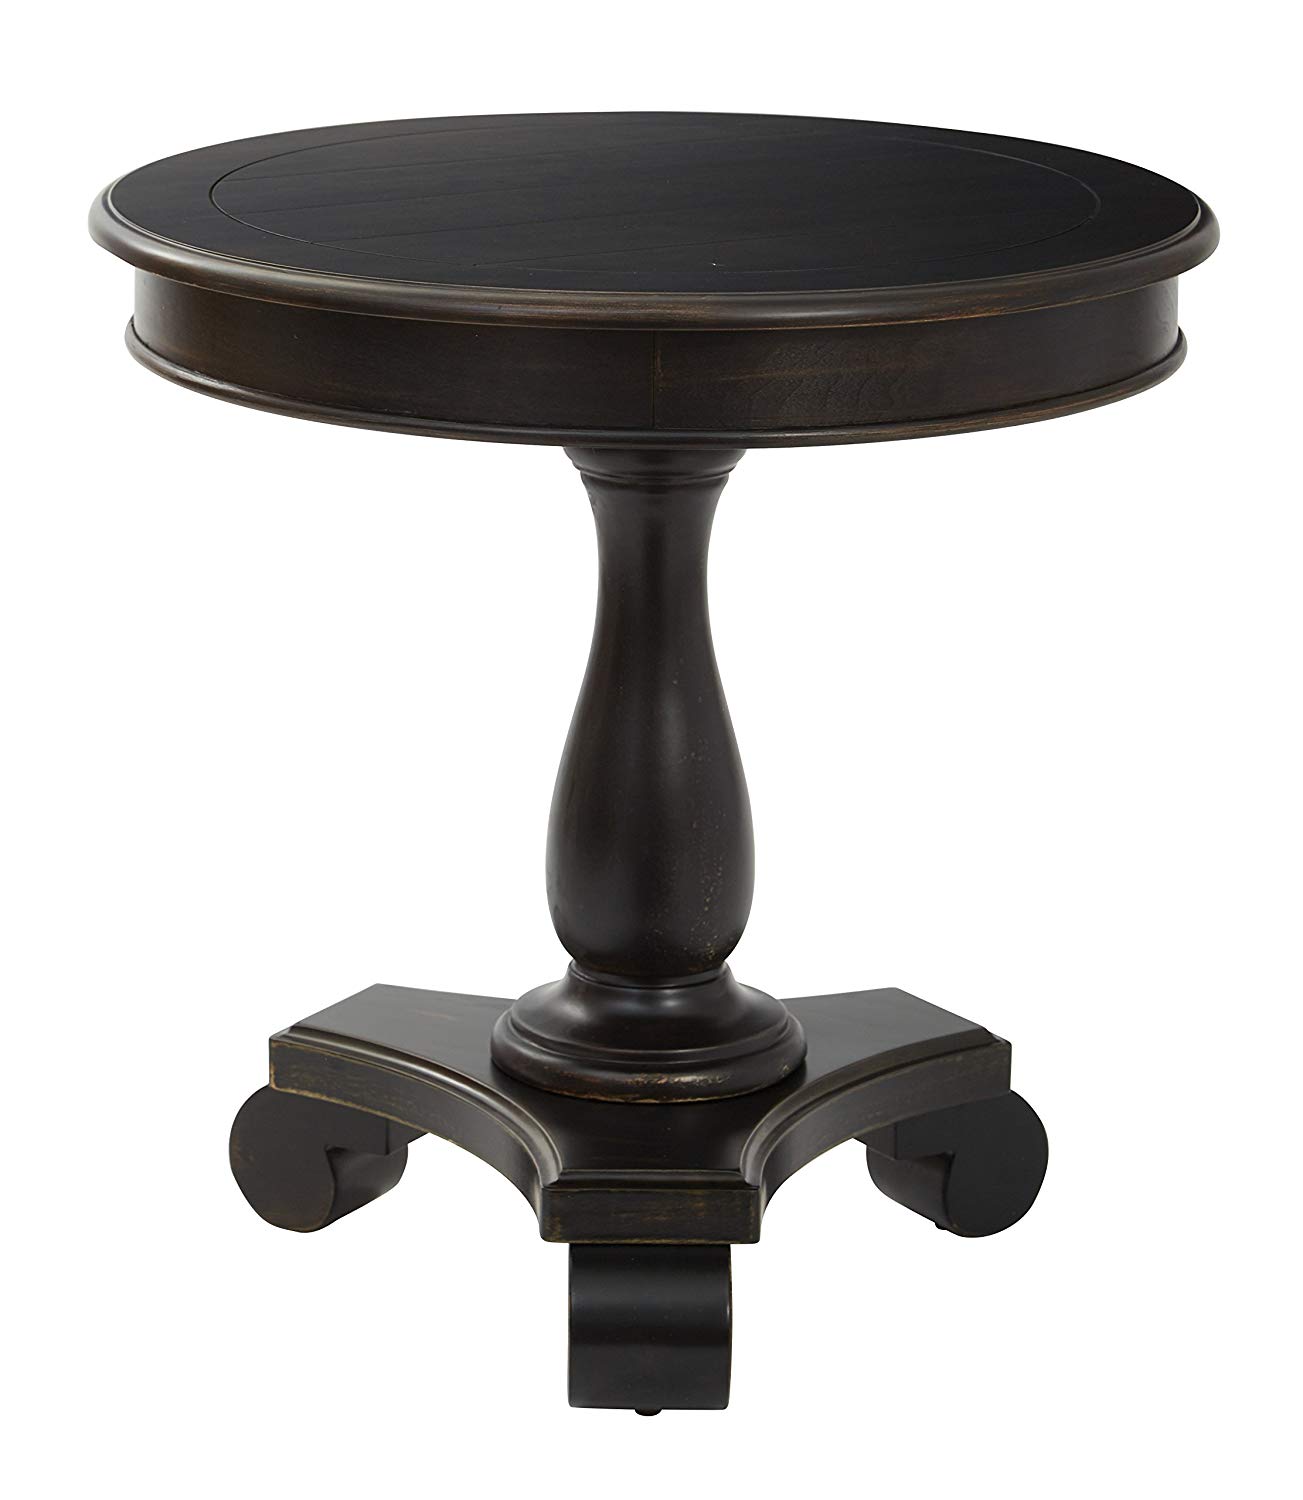 inspired bassett avlat osp avalon round accent table antique black kitchen dining decoration pieces for drawing room inch console small garden cover stump end navy blue wood